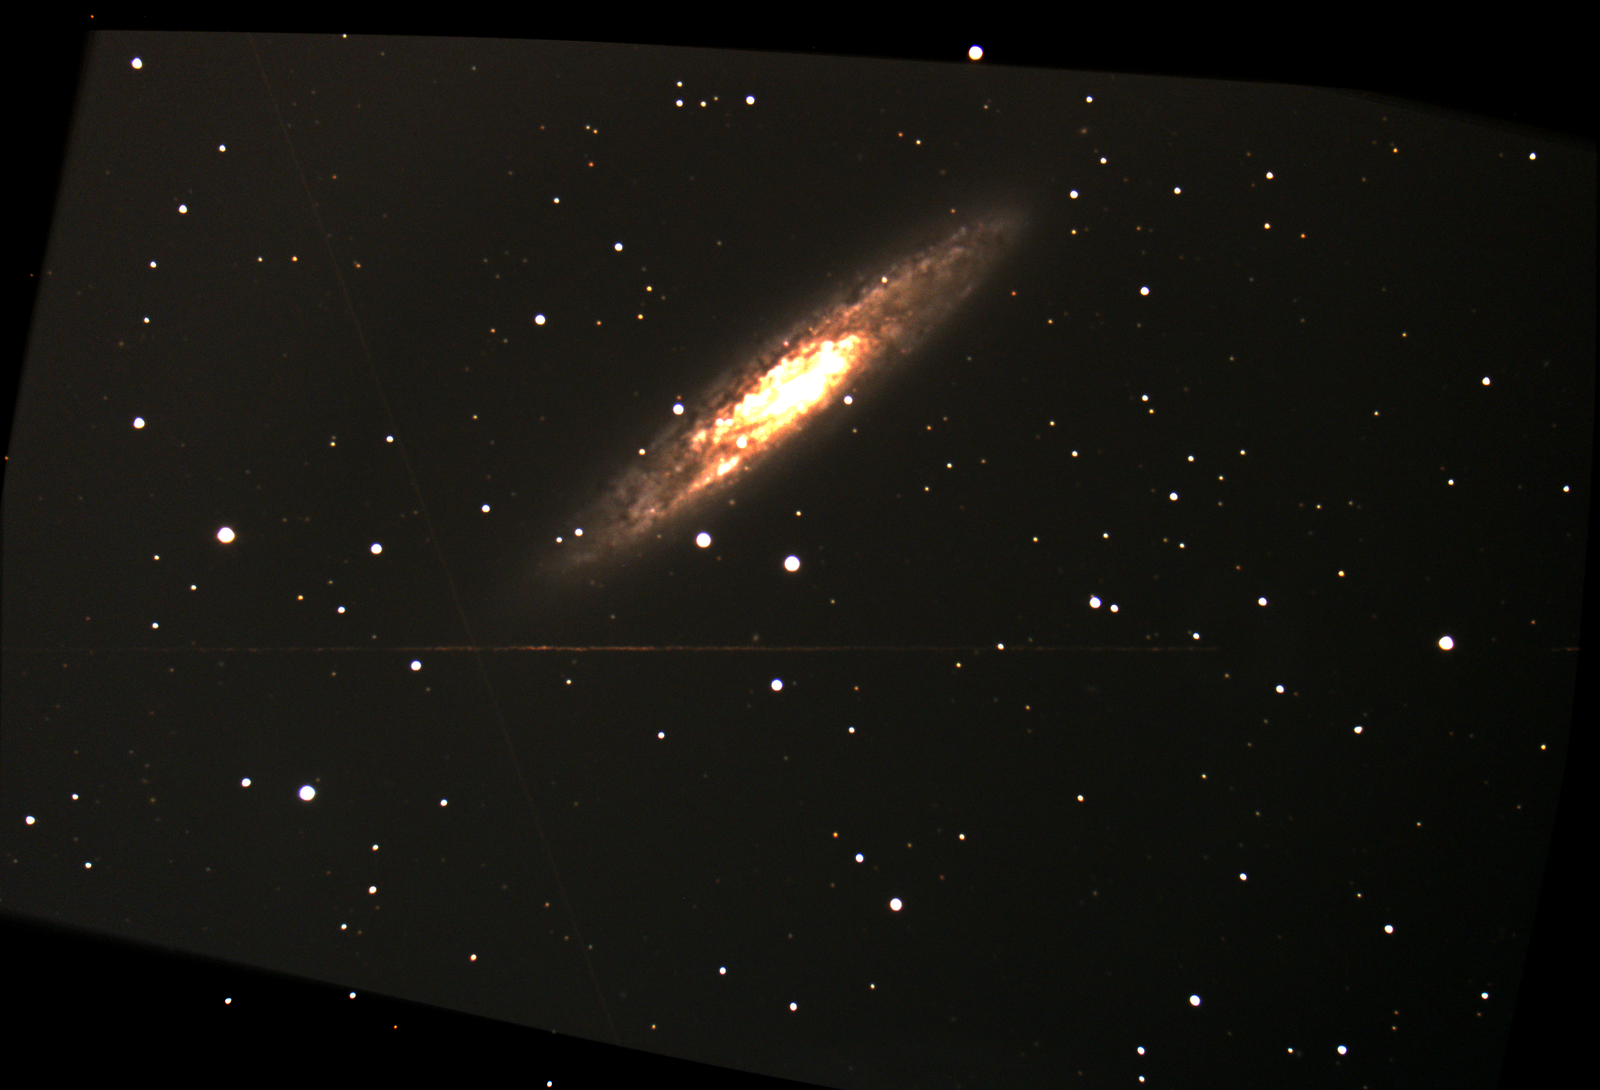 Taking flats with LED tracing PAD - Beginning Deep Sky Imaging